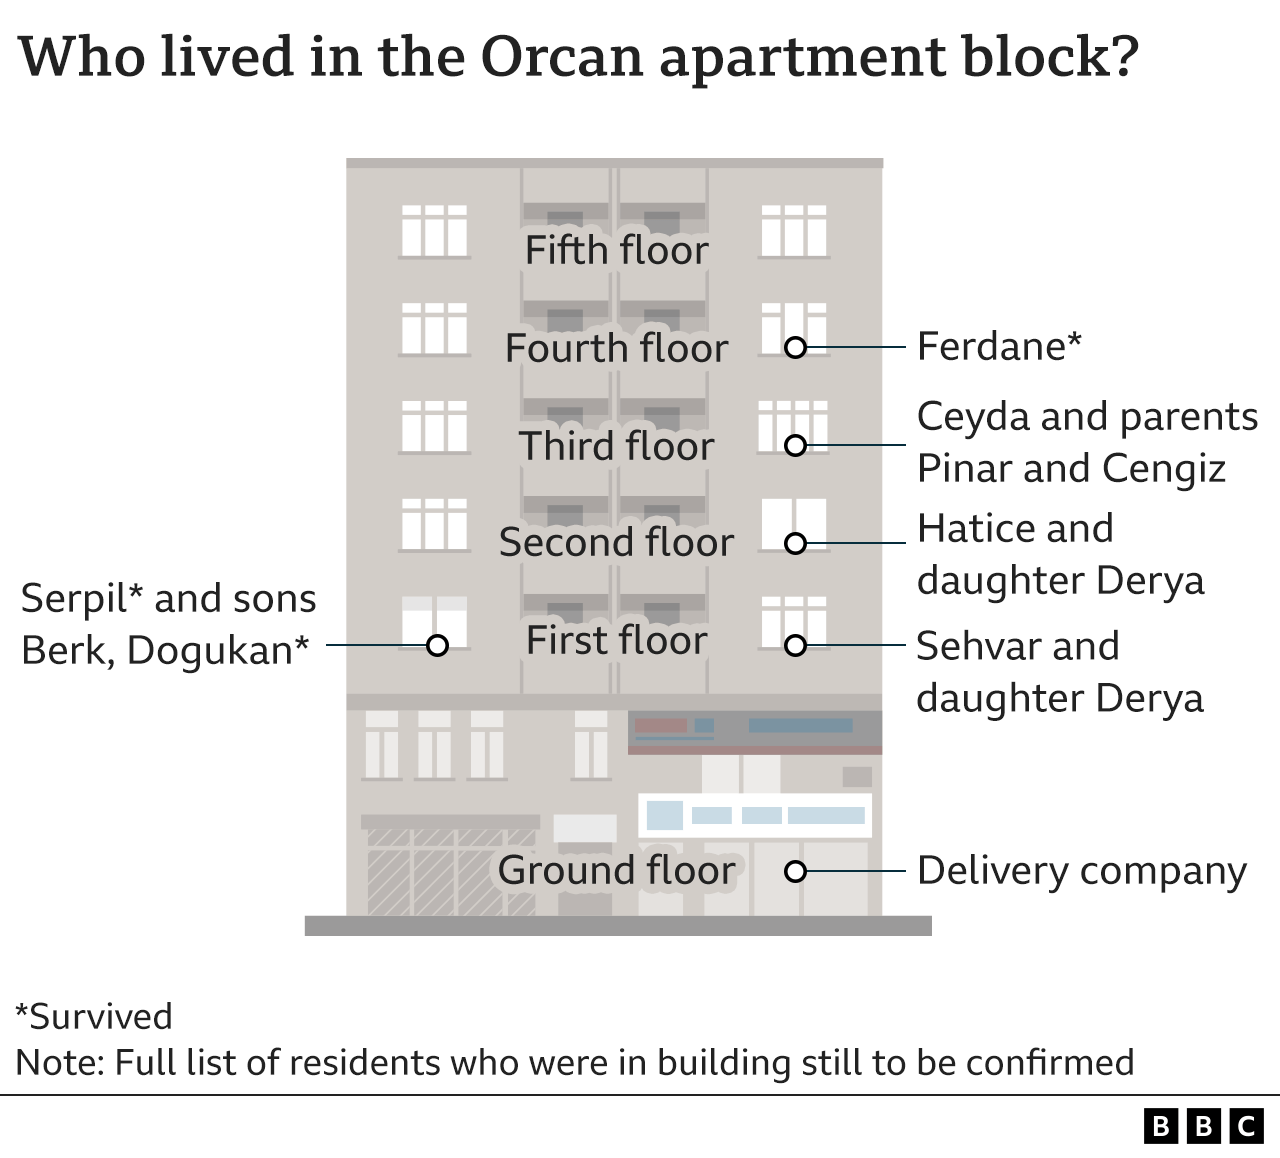 Graphic showing who lived on which floor in the Orcan apartment building. Ceyda and her parents lived on the third floor